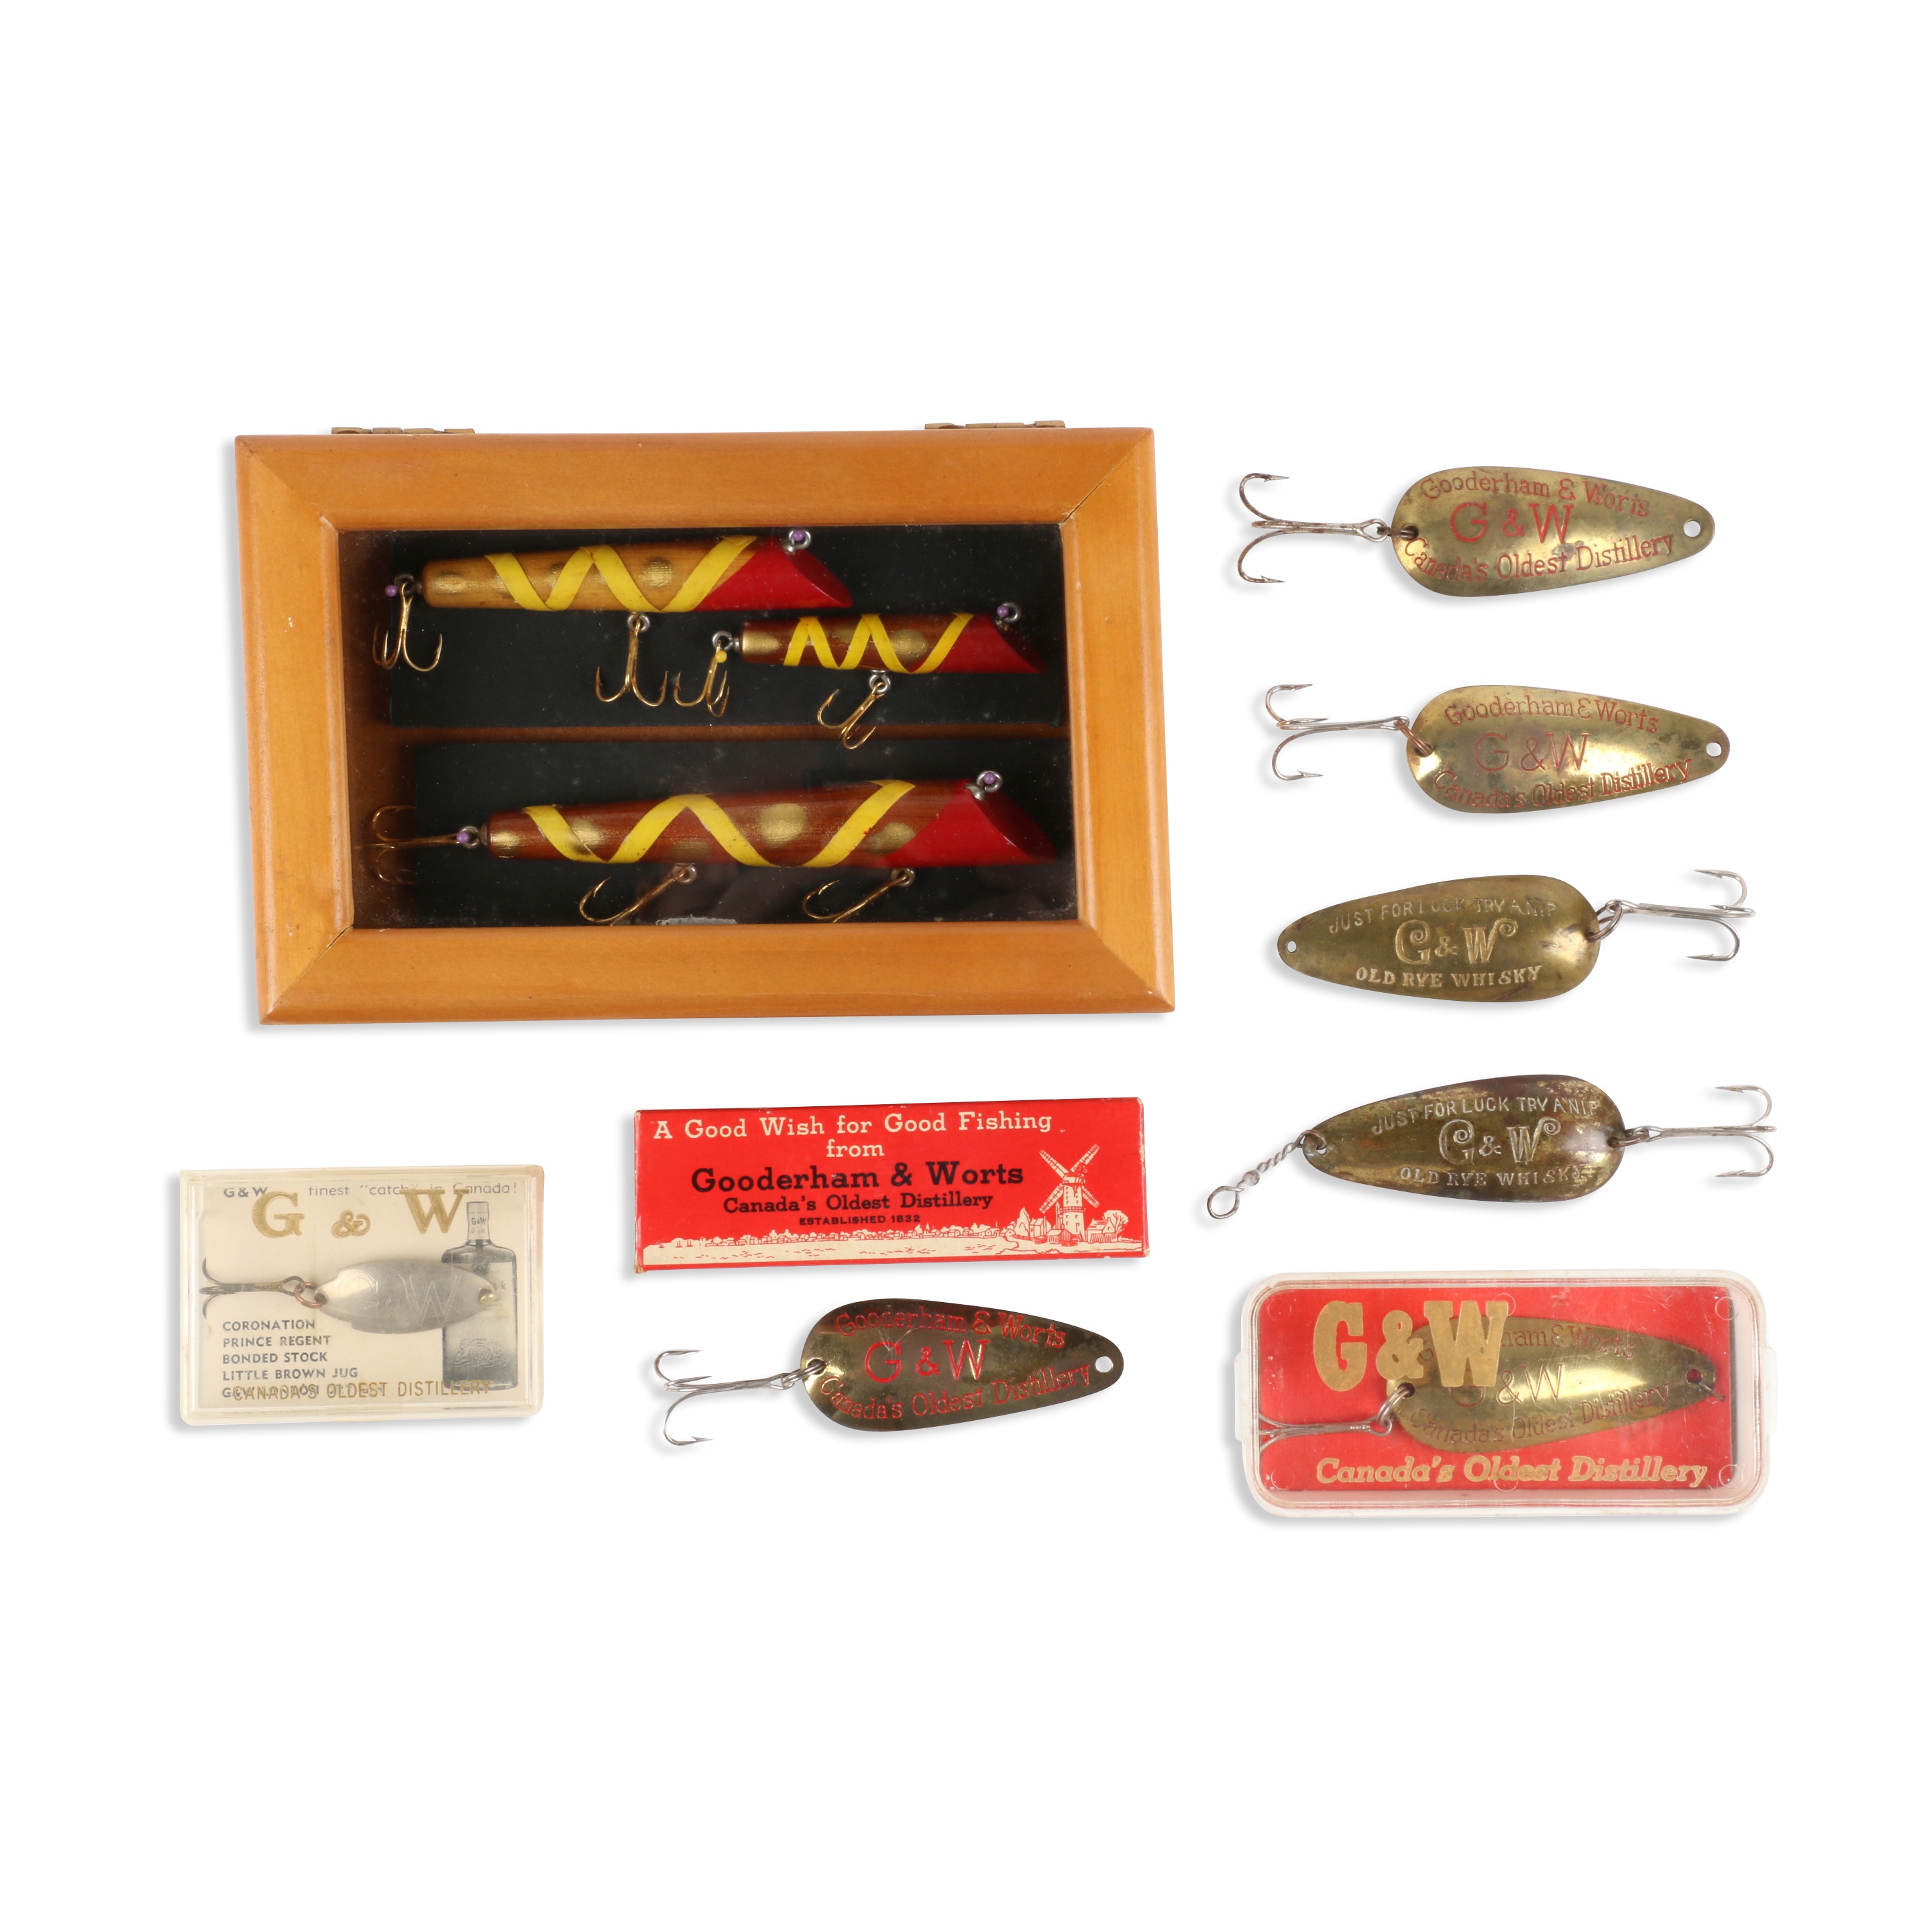 G & W Lures and Dai Lures  Miller & Miller Auctions Ltd